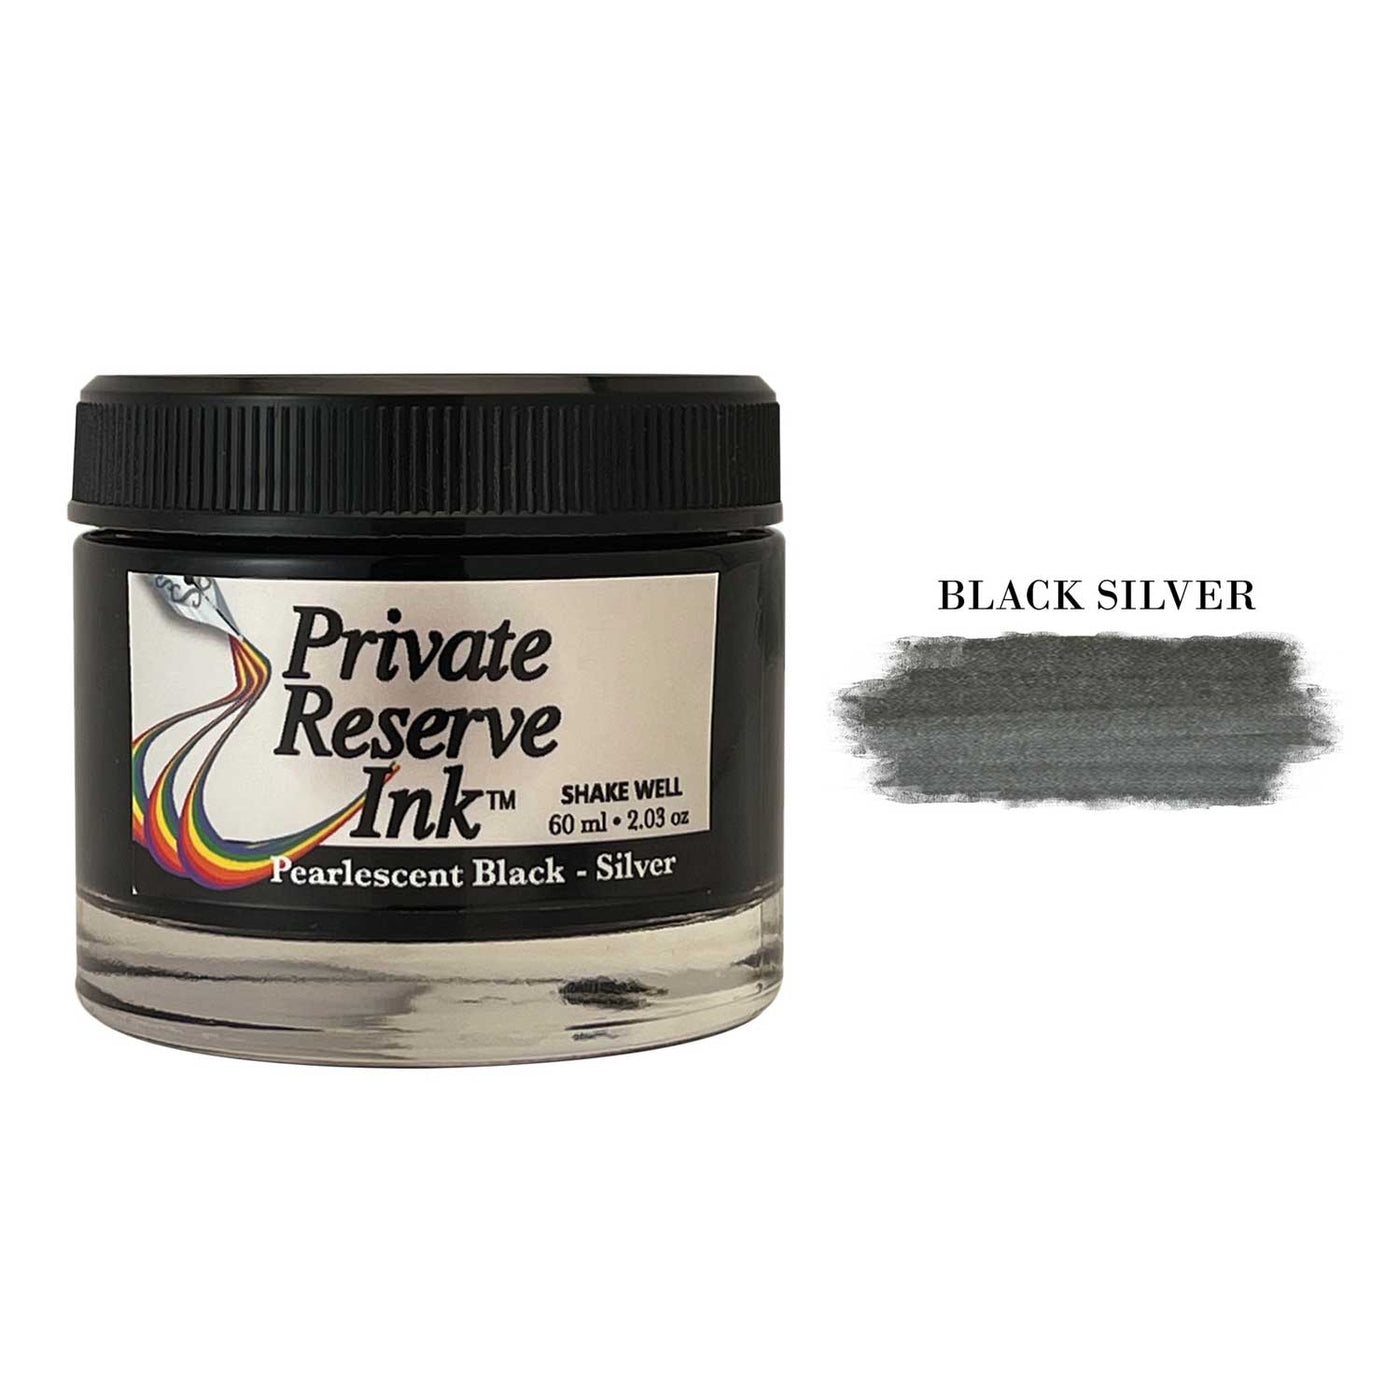 Private Reserve Pearlescent Black Silver Ink Bottle - 60ml 1